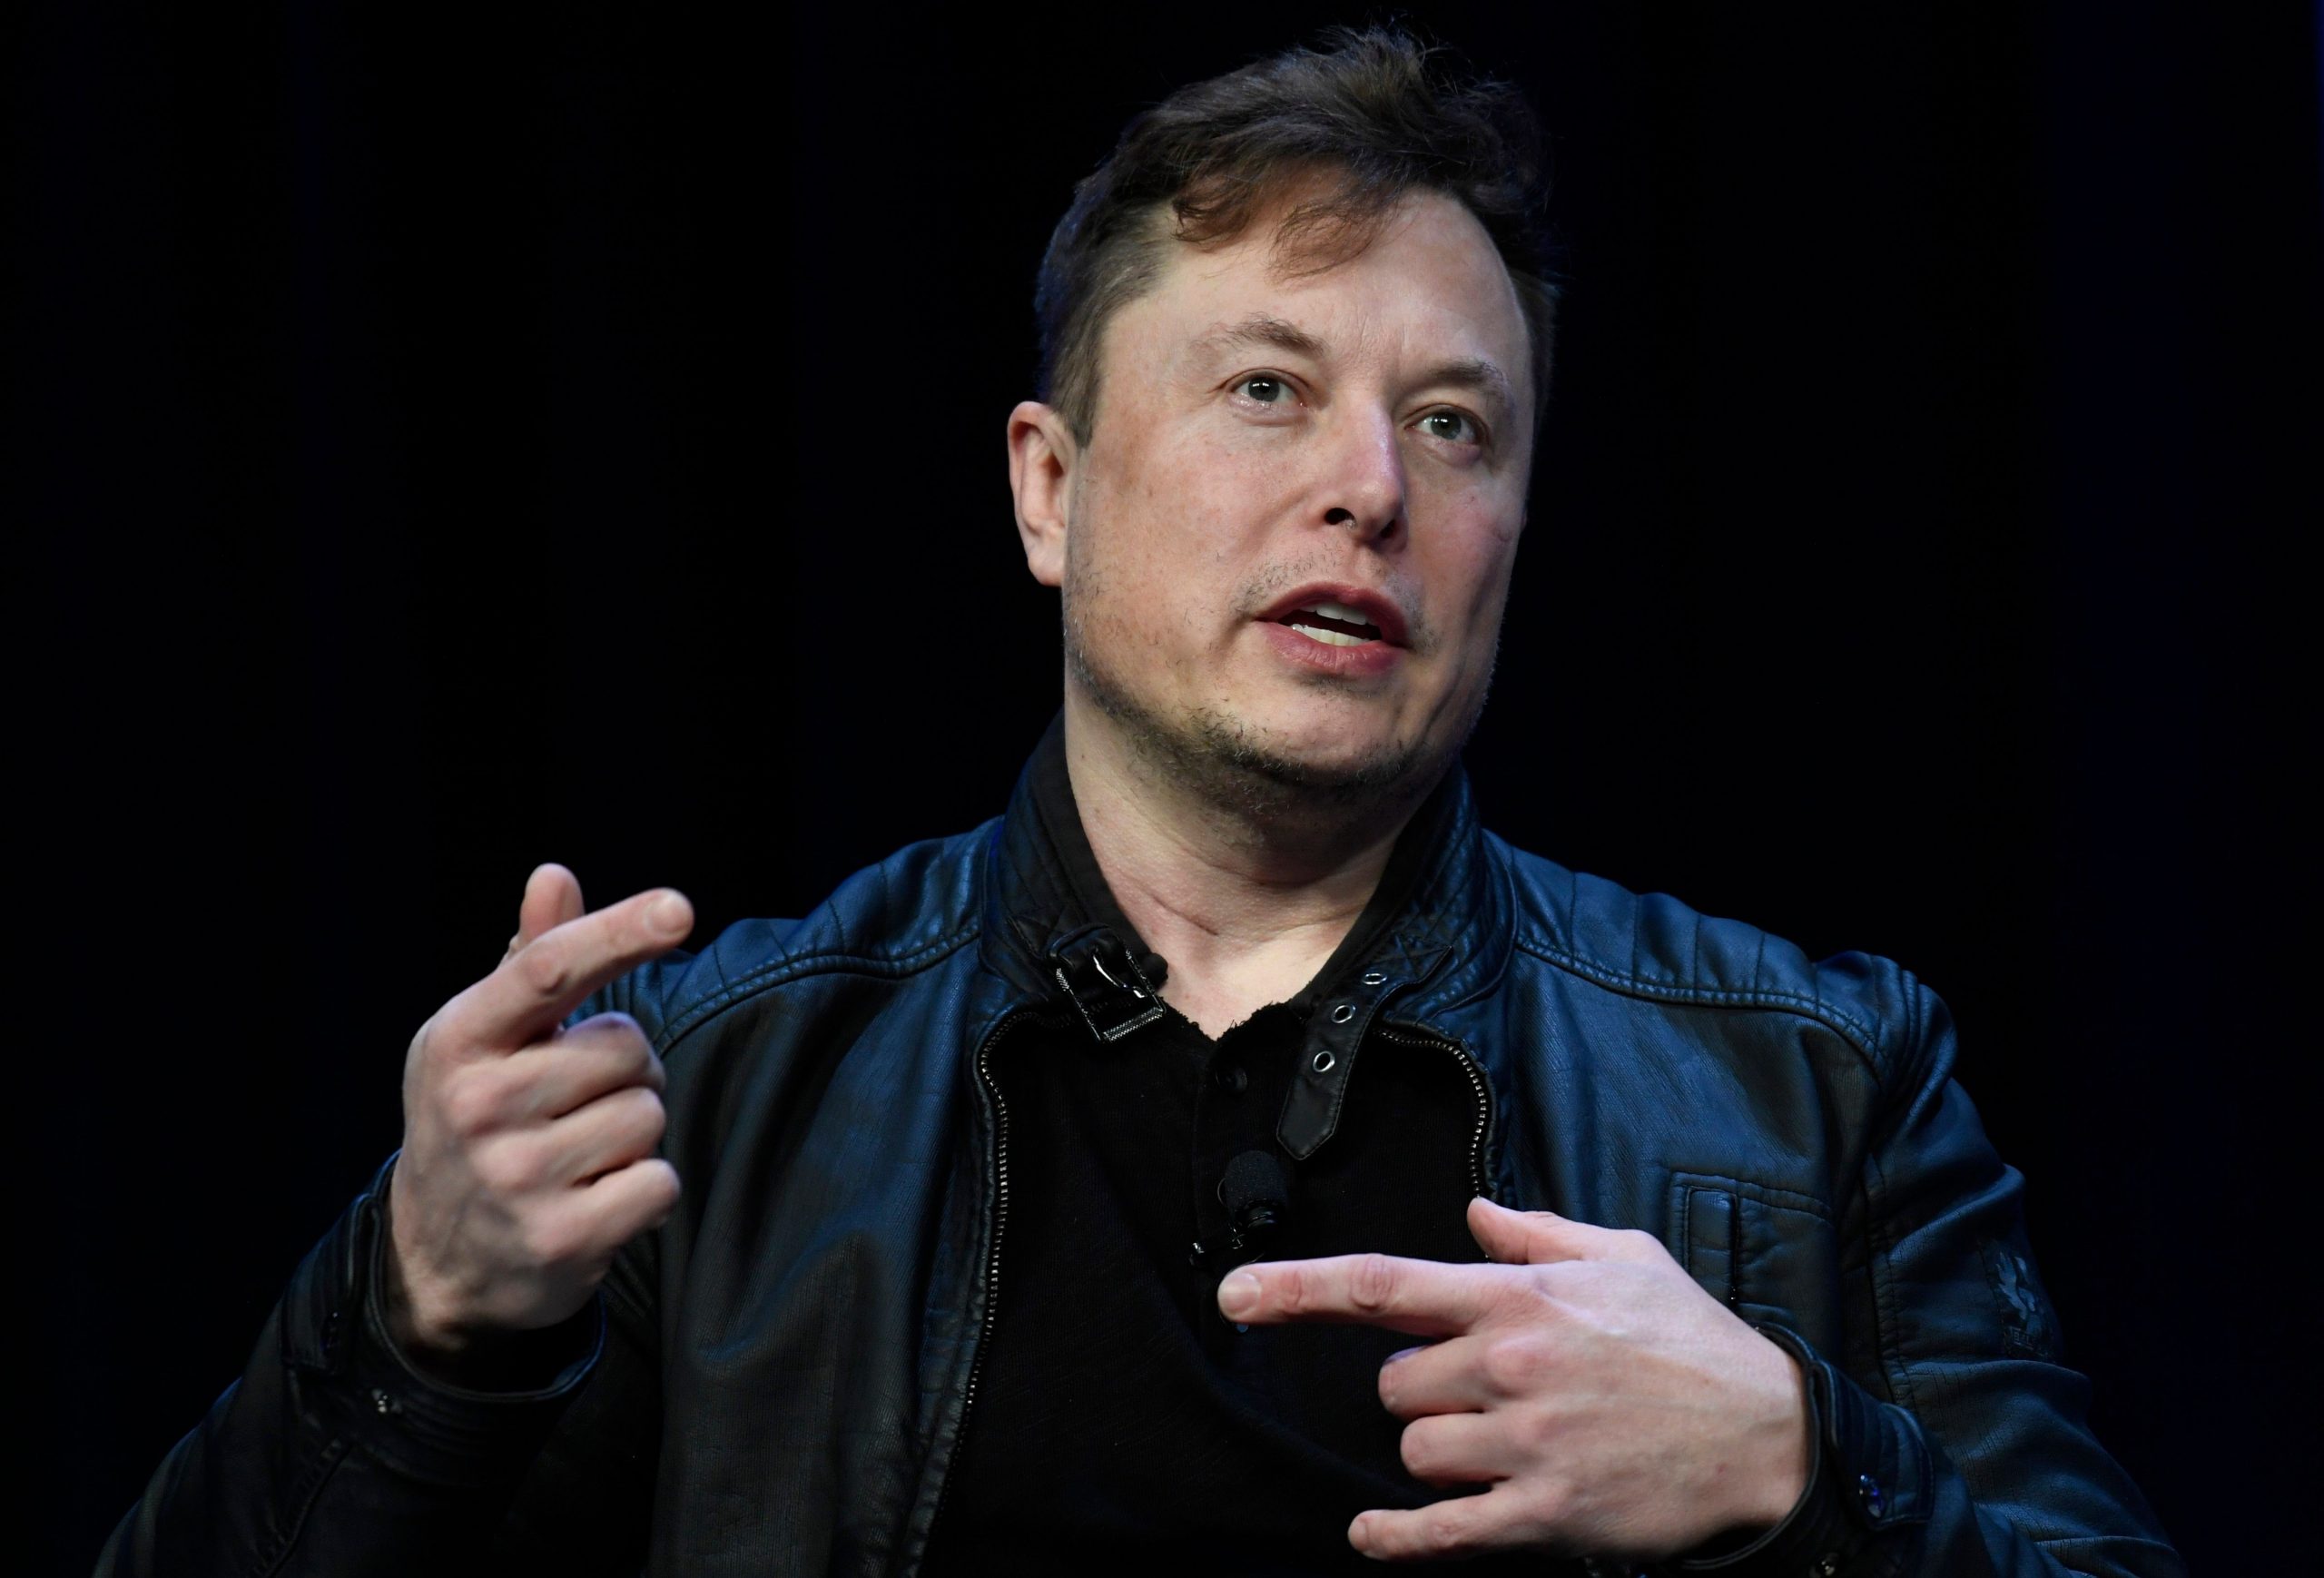 Elon Musk jokes about corporate ‘Pride’ but Tesla tops LGBTQ equality index